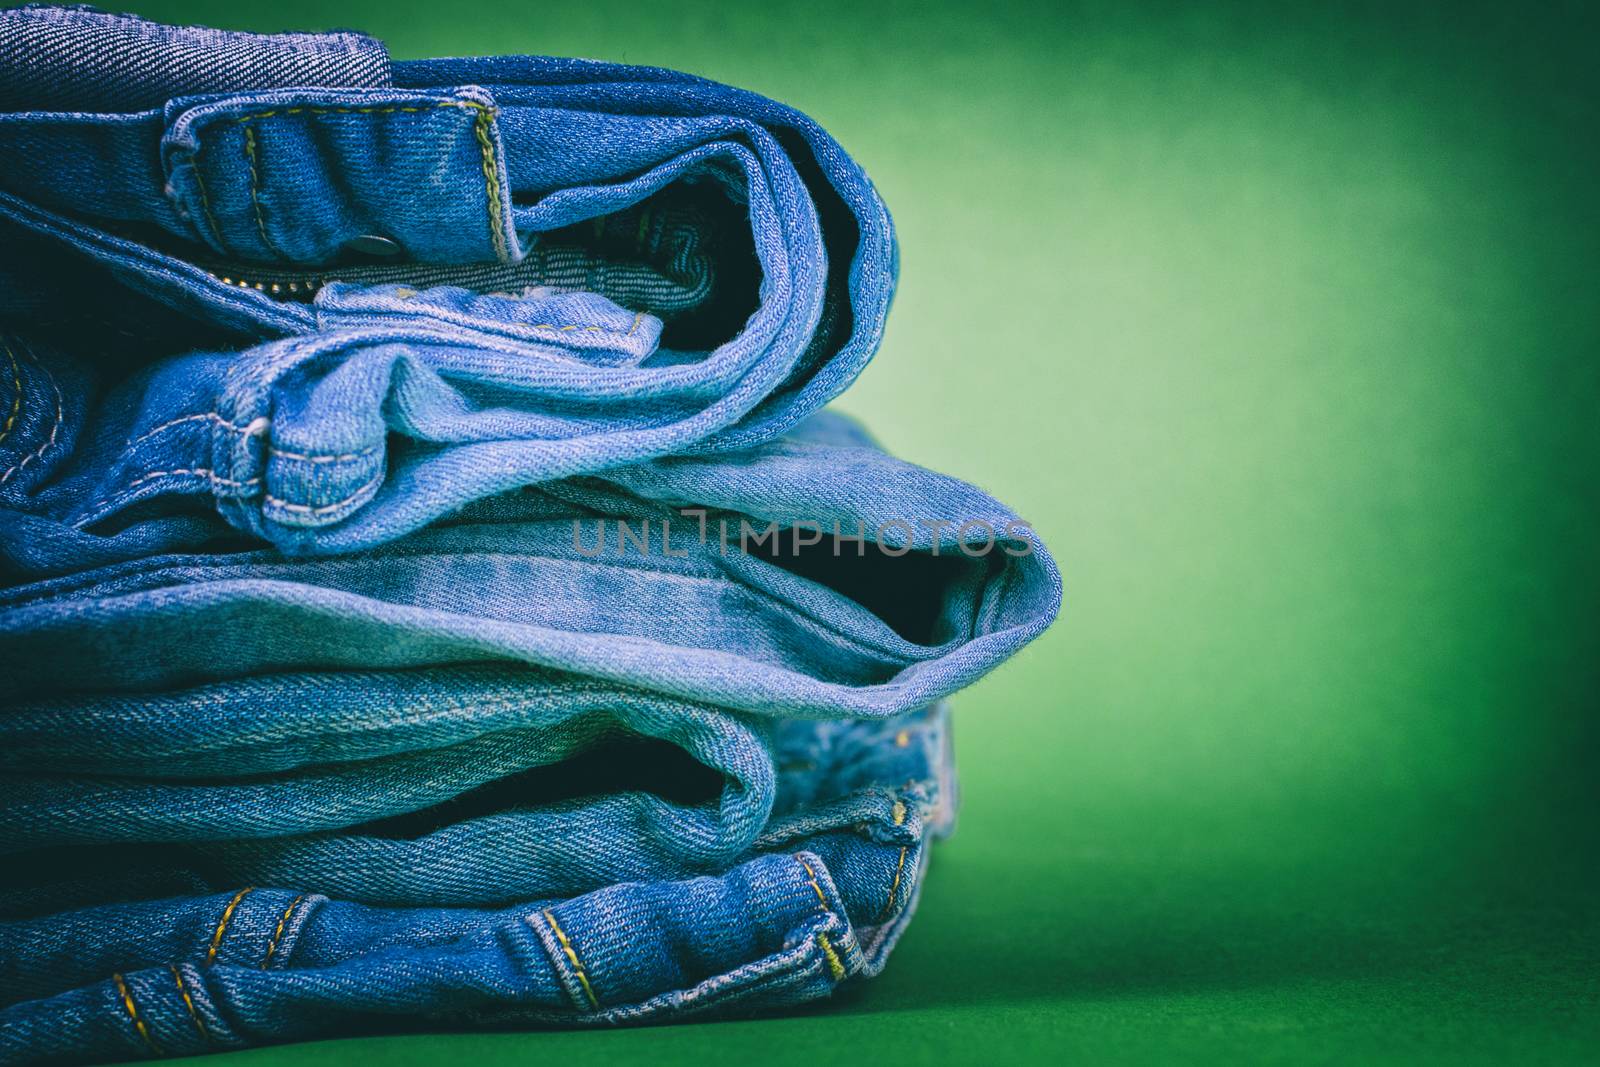 Women's jeans folded in a pile on a colored background. Made in a vintage performance.